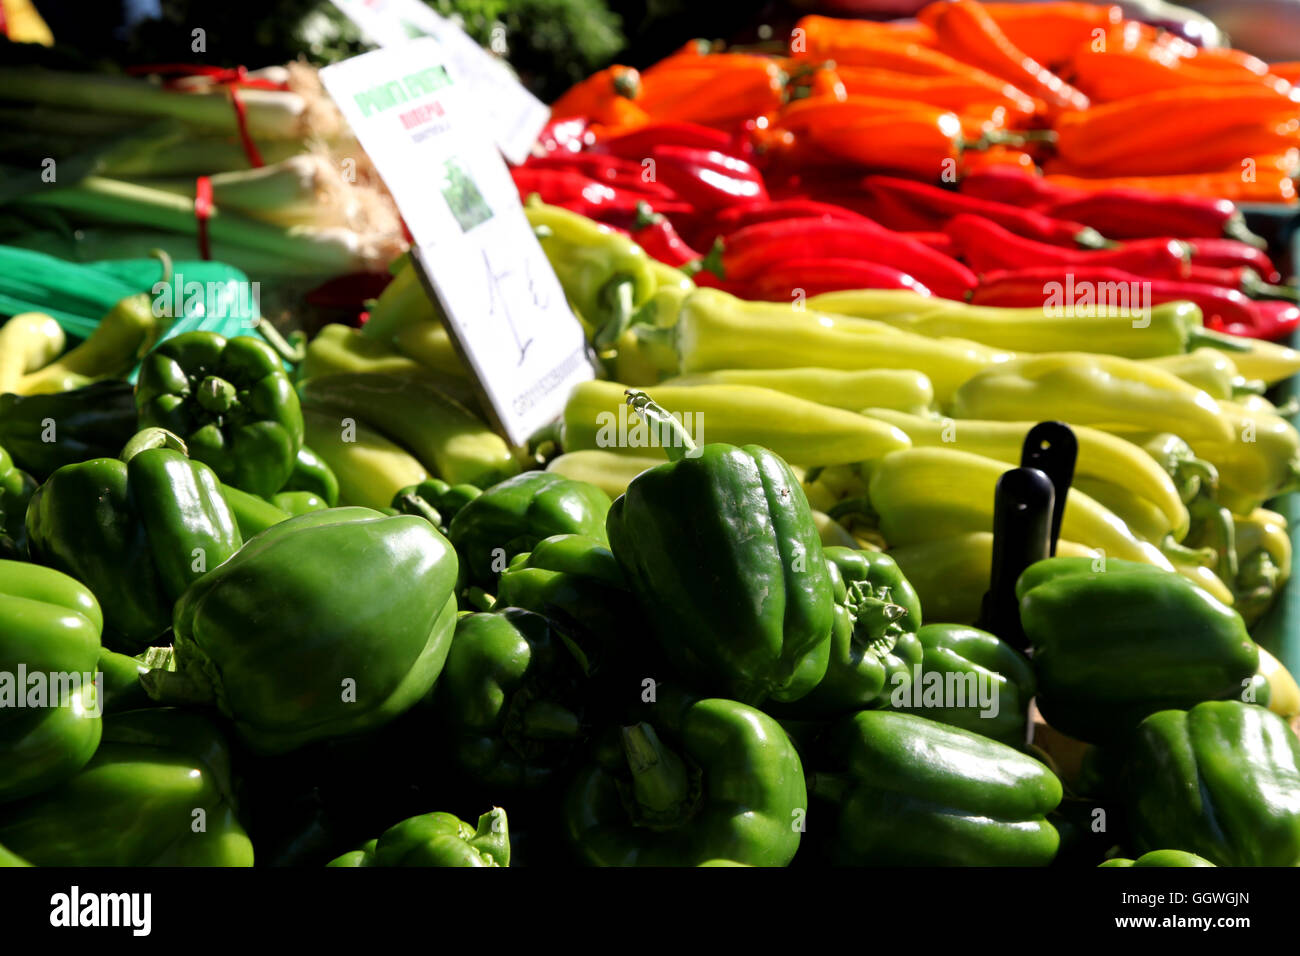 A display of sweet peppers on a mediterranean farm market stall Stock Photo